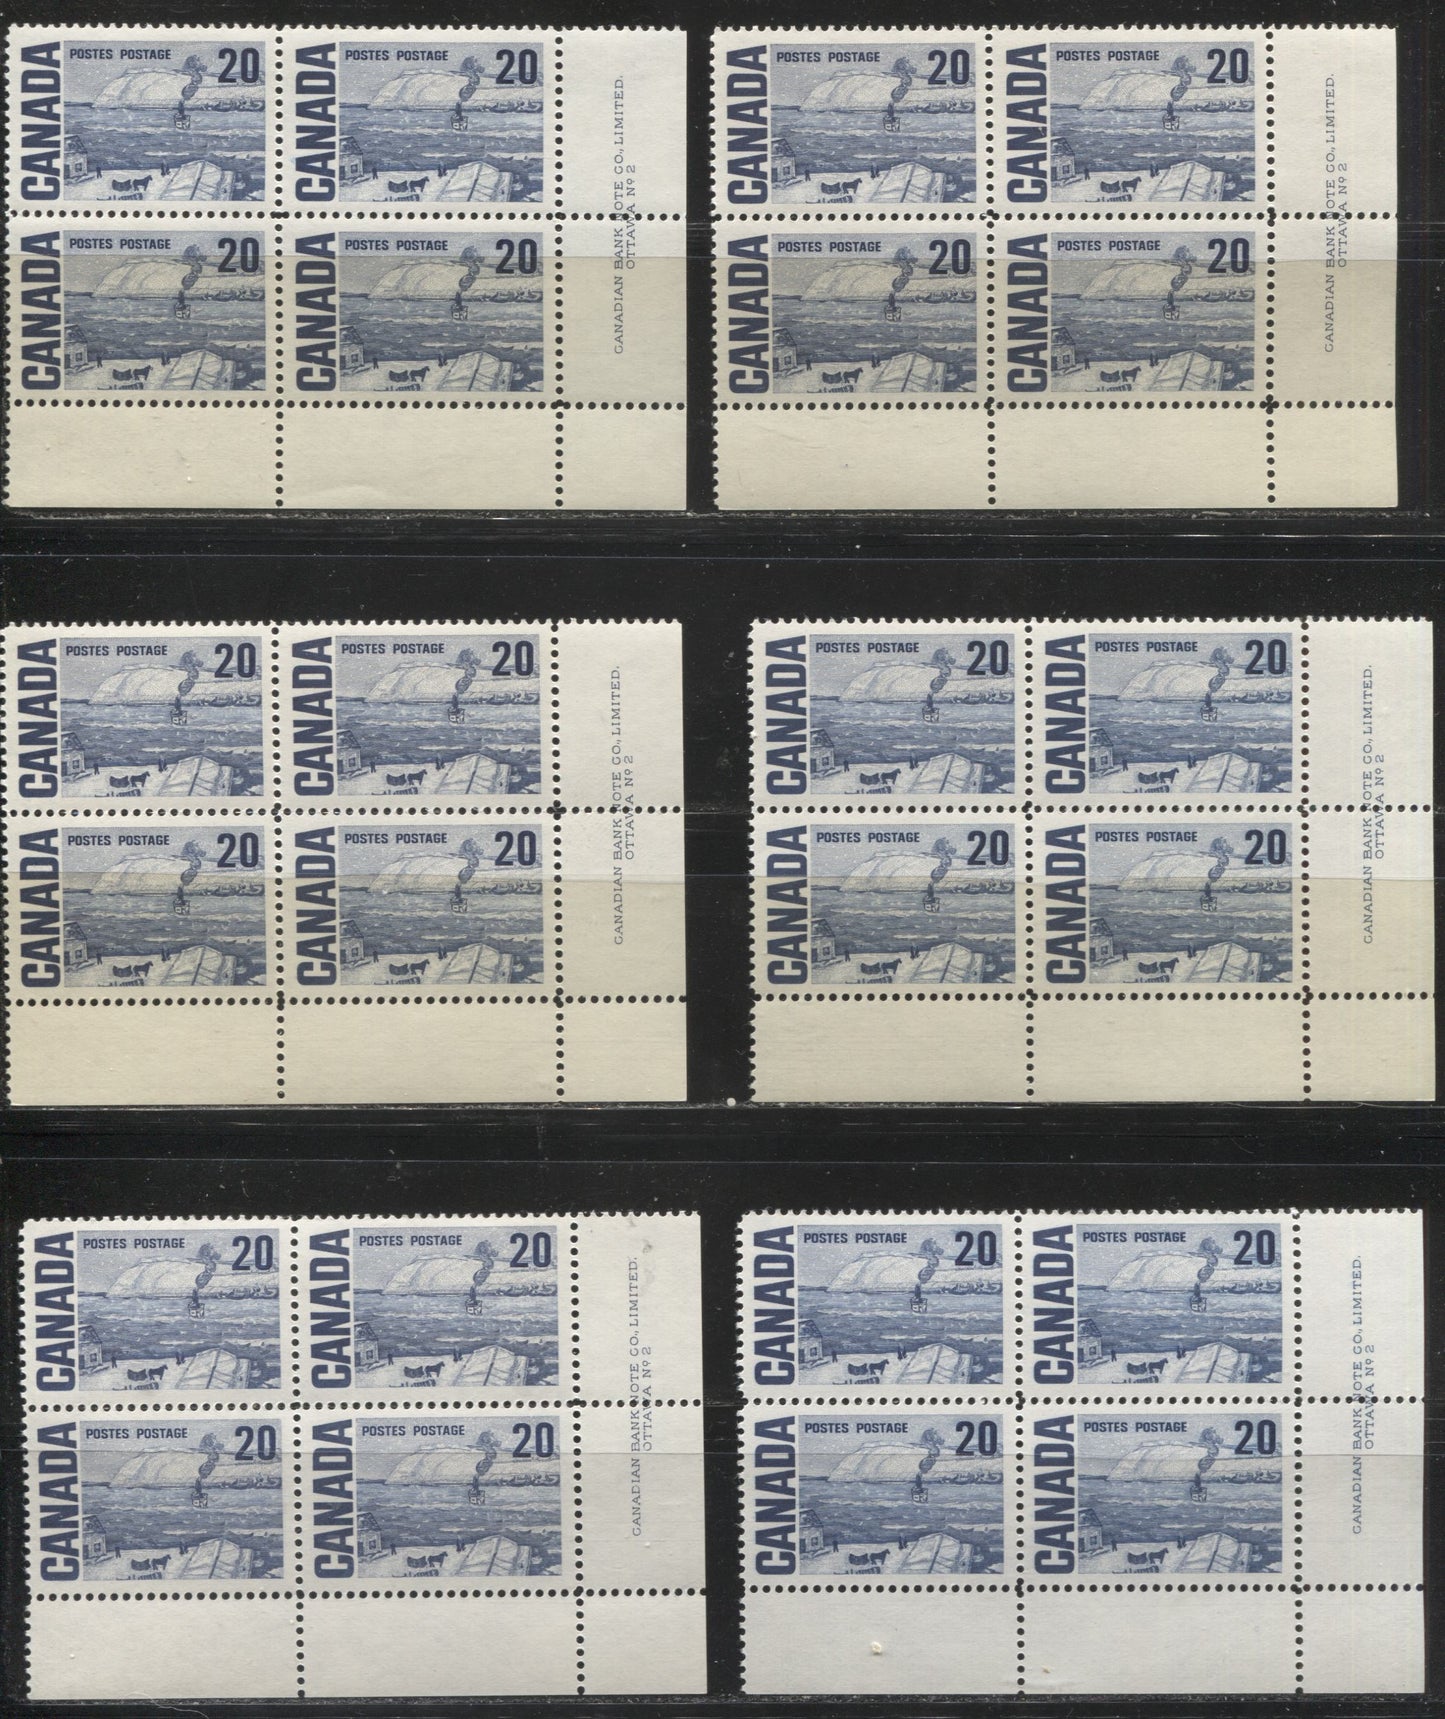 Lot 66 Canada #464 20c Indigo Blue, Dark Blue & Dull Indigo Blue The Ferry, Quebec, 1967-1973 Centennial Definitive Issue, Seven VFNH LR Plate 2 Blocks of 4 On Various Fluorescent Horizontal And Vertical Wove Papers With Smooth & Streaky Dex Gum